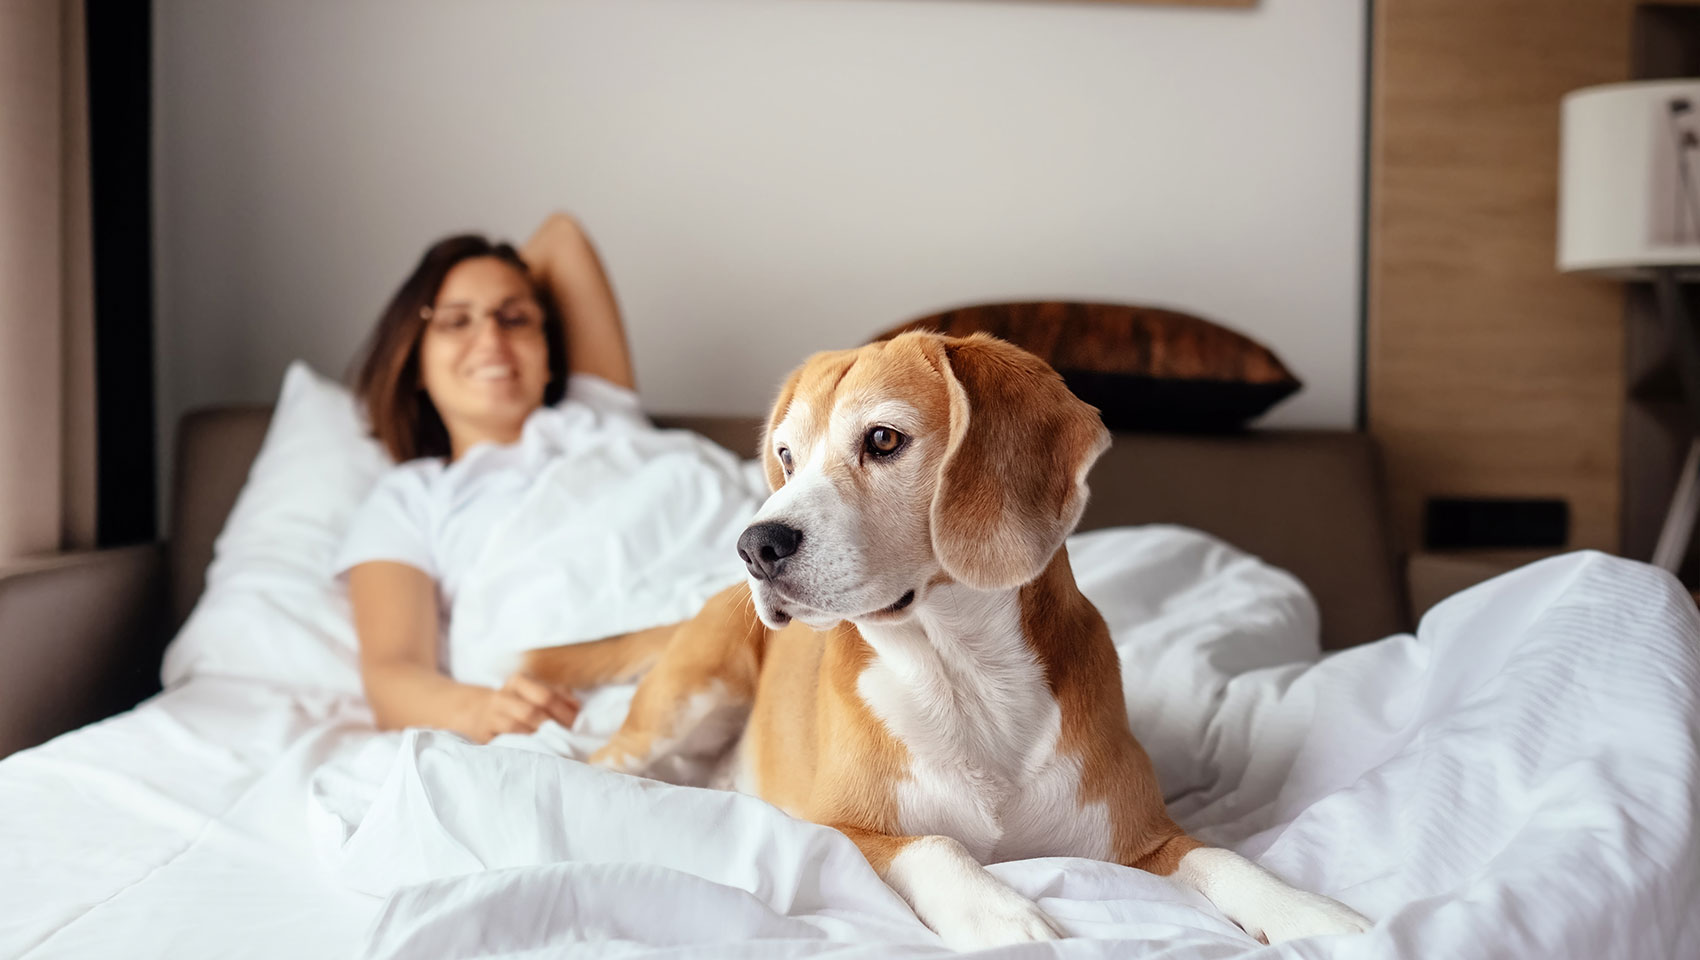 Dog on bed with woman